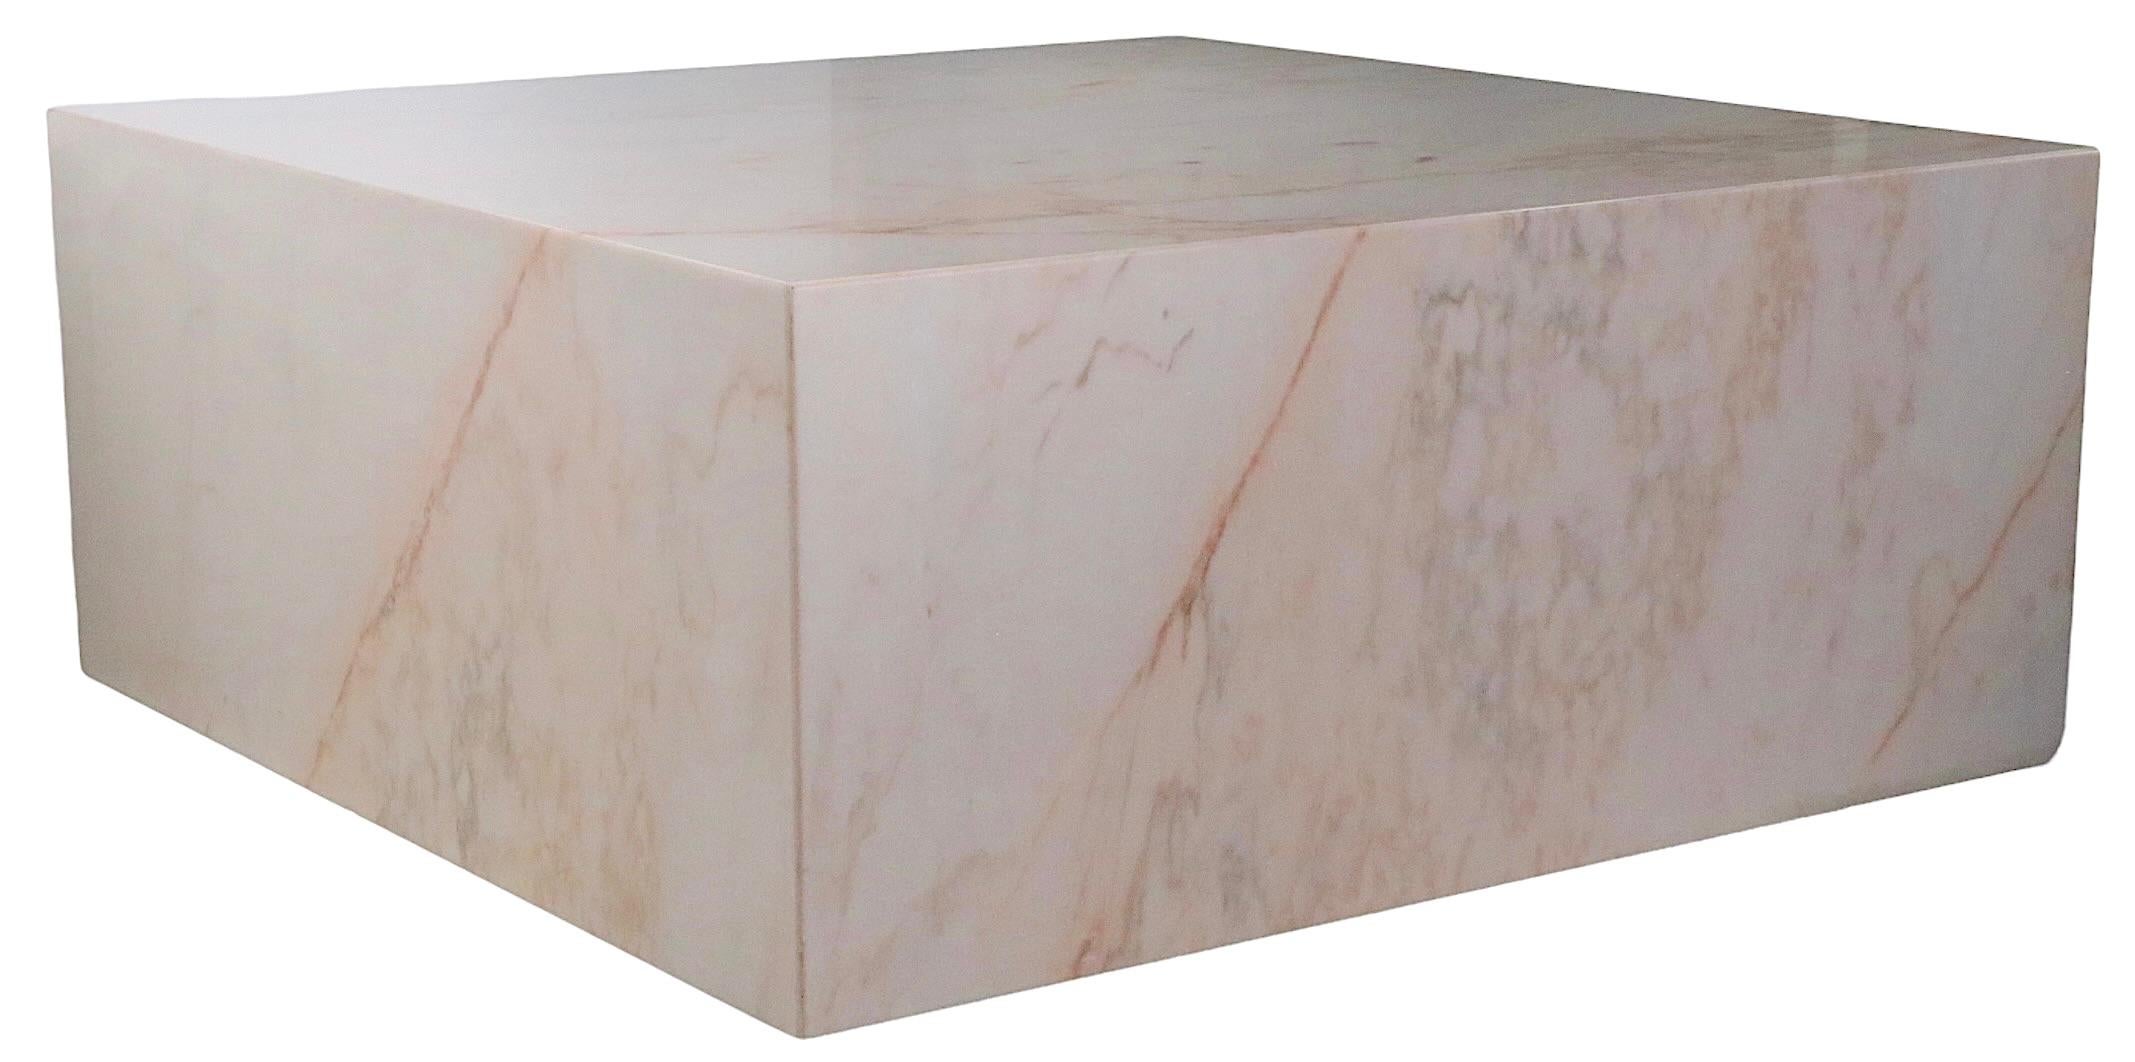 Post Modern Square Marble Coffee Tables, circa 1970s, Pair Available In Good Condition For Sale In New York, NY